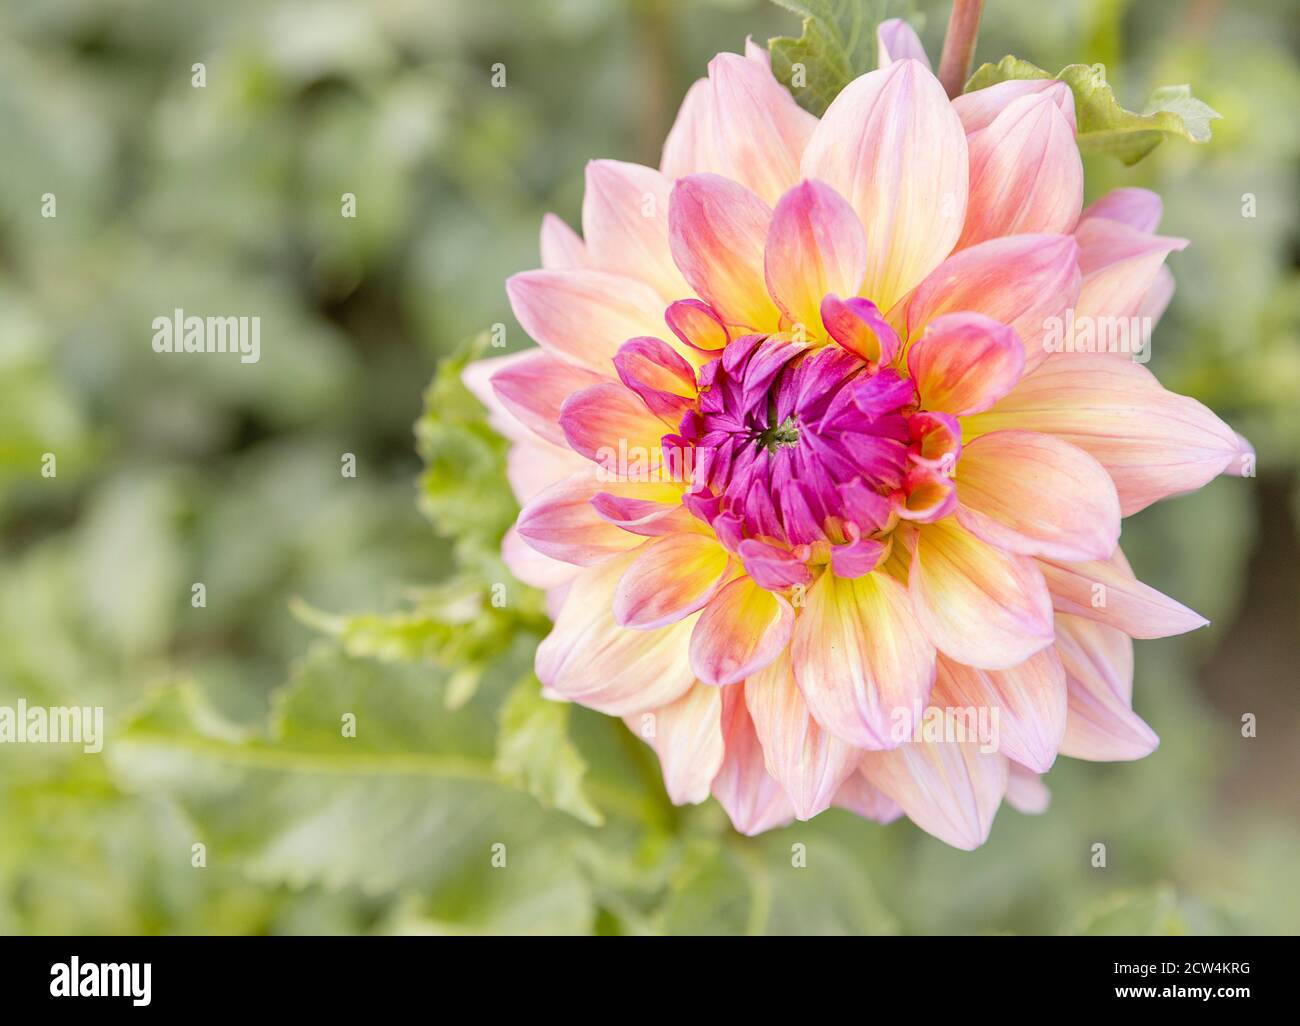 View of head of the flower dahlia 'crazy love' Stock Photo